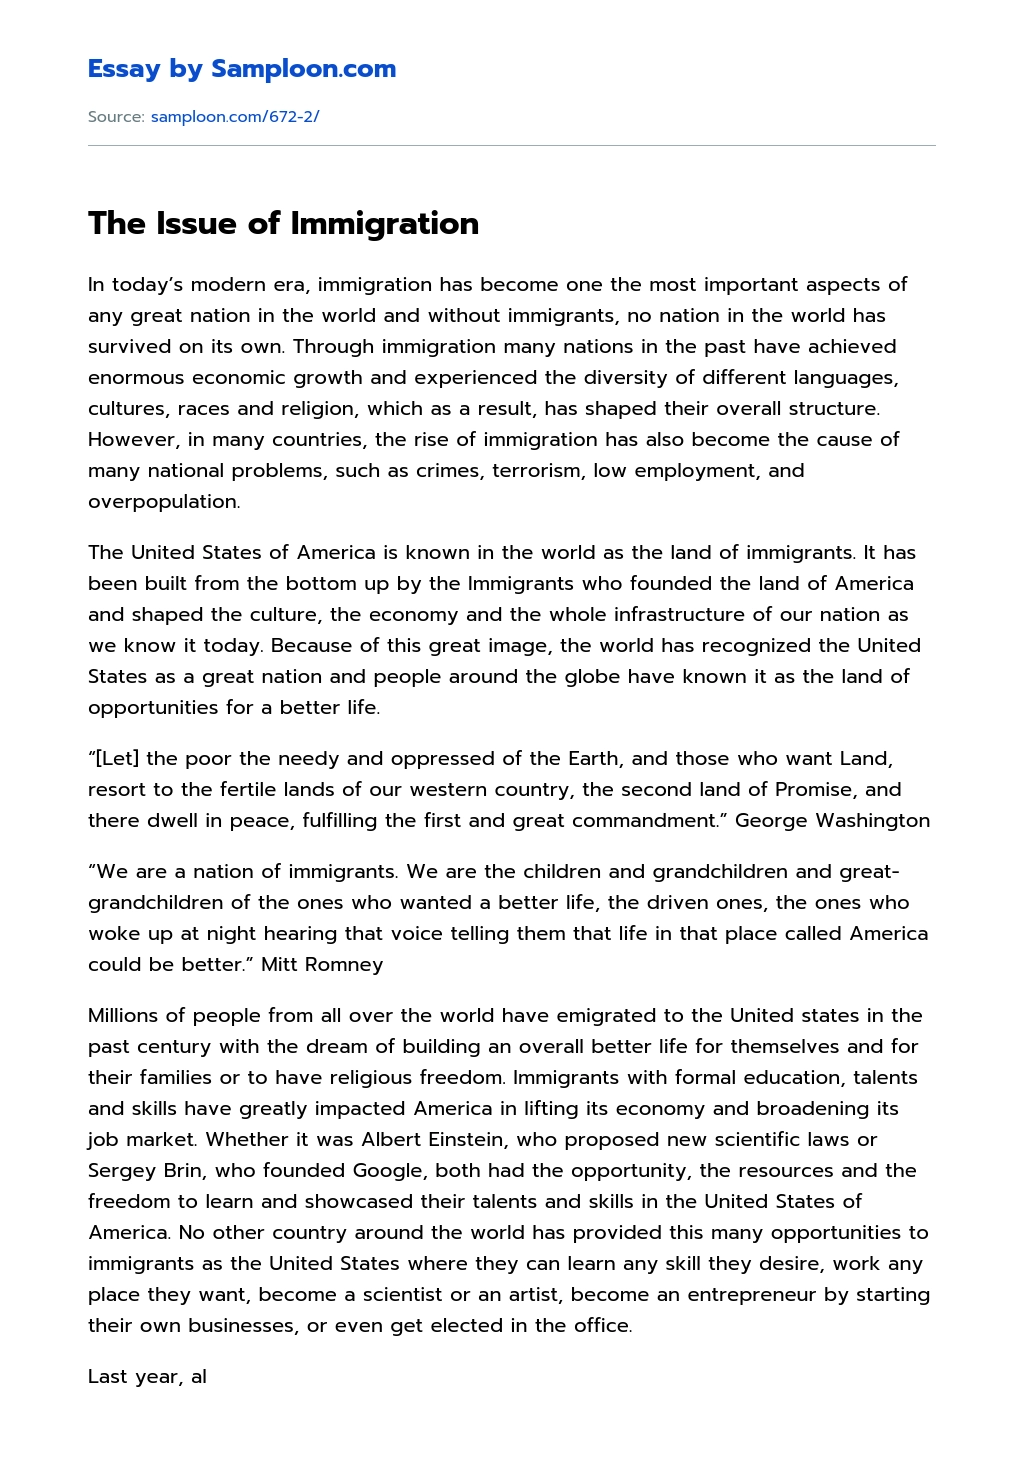 The Issue of Immigration essay